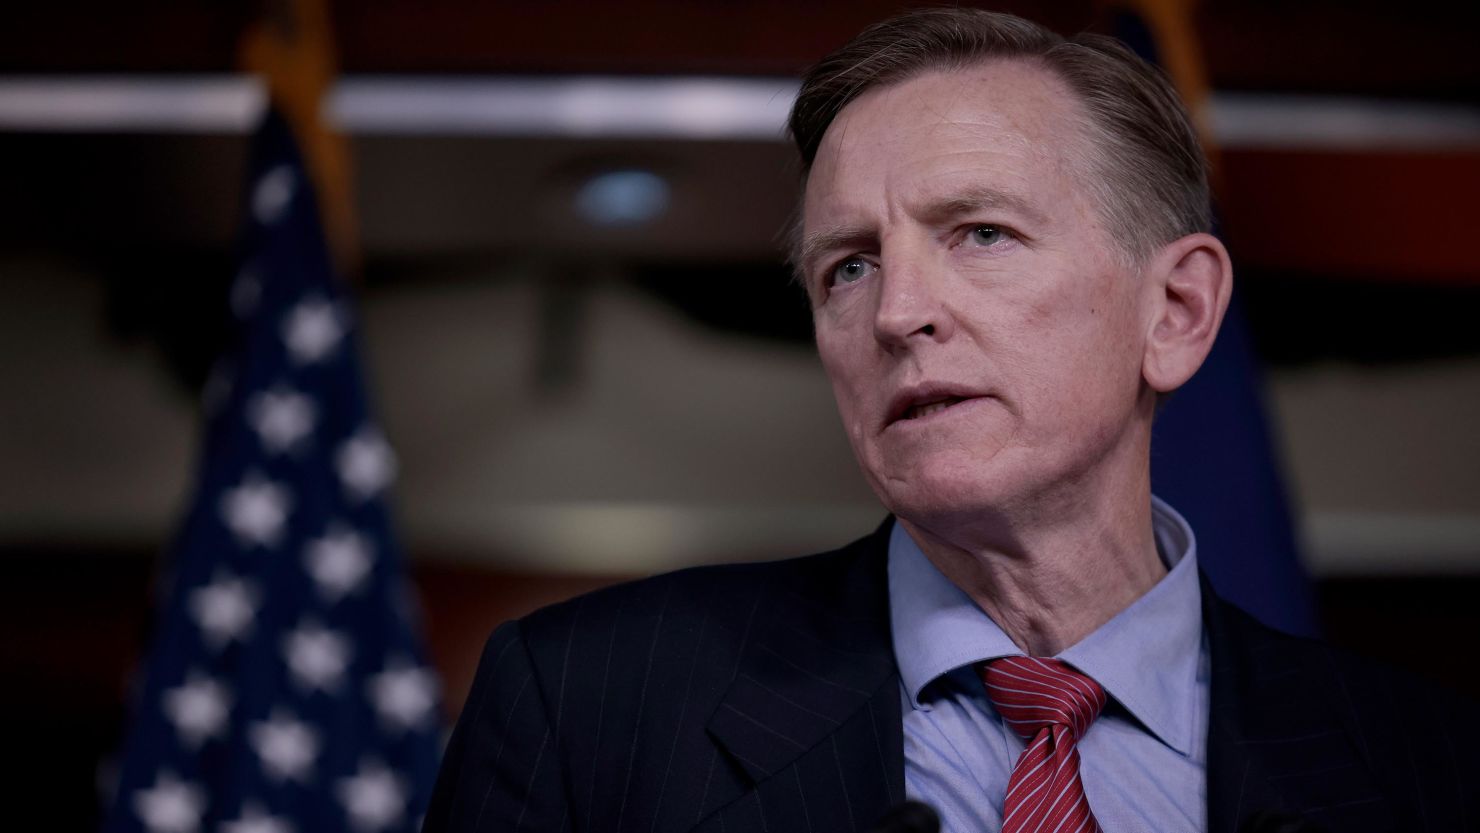 Arizona Rep. Paul Gosar speaks at a news conference at the US Capitol in Washington, DC, on December 7, 2021.